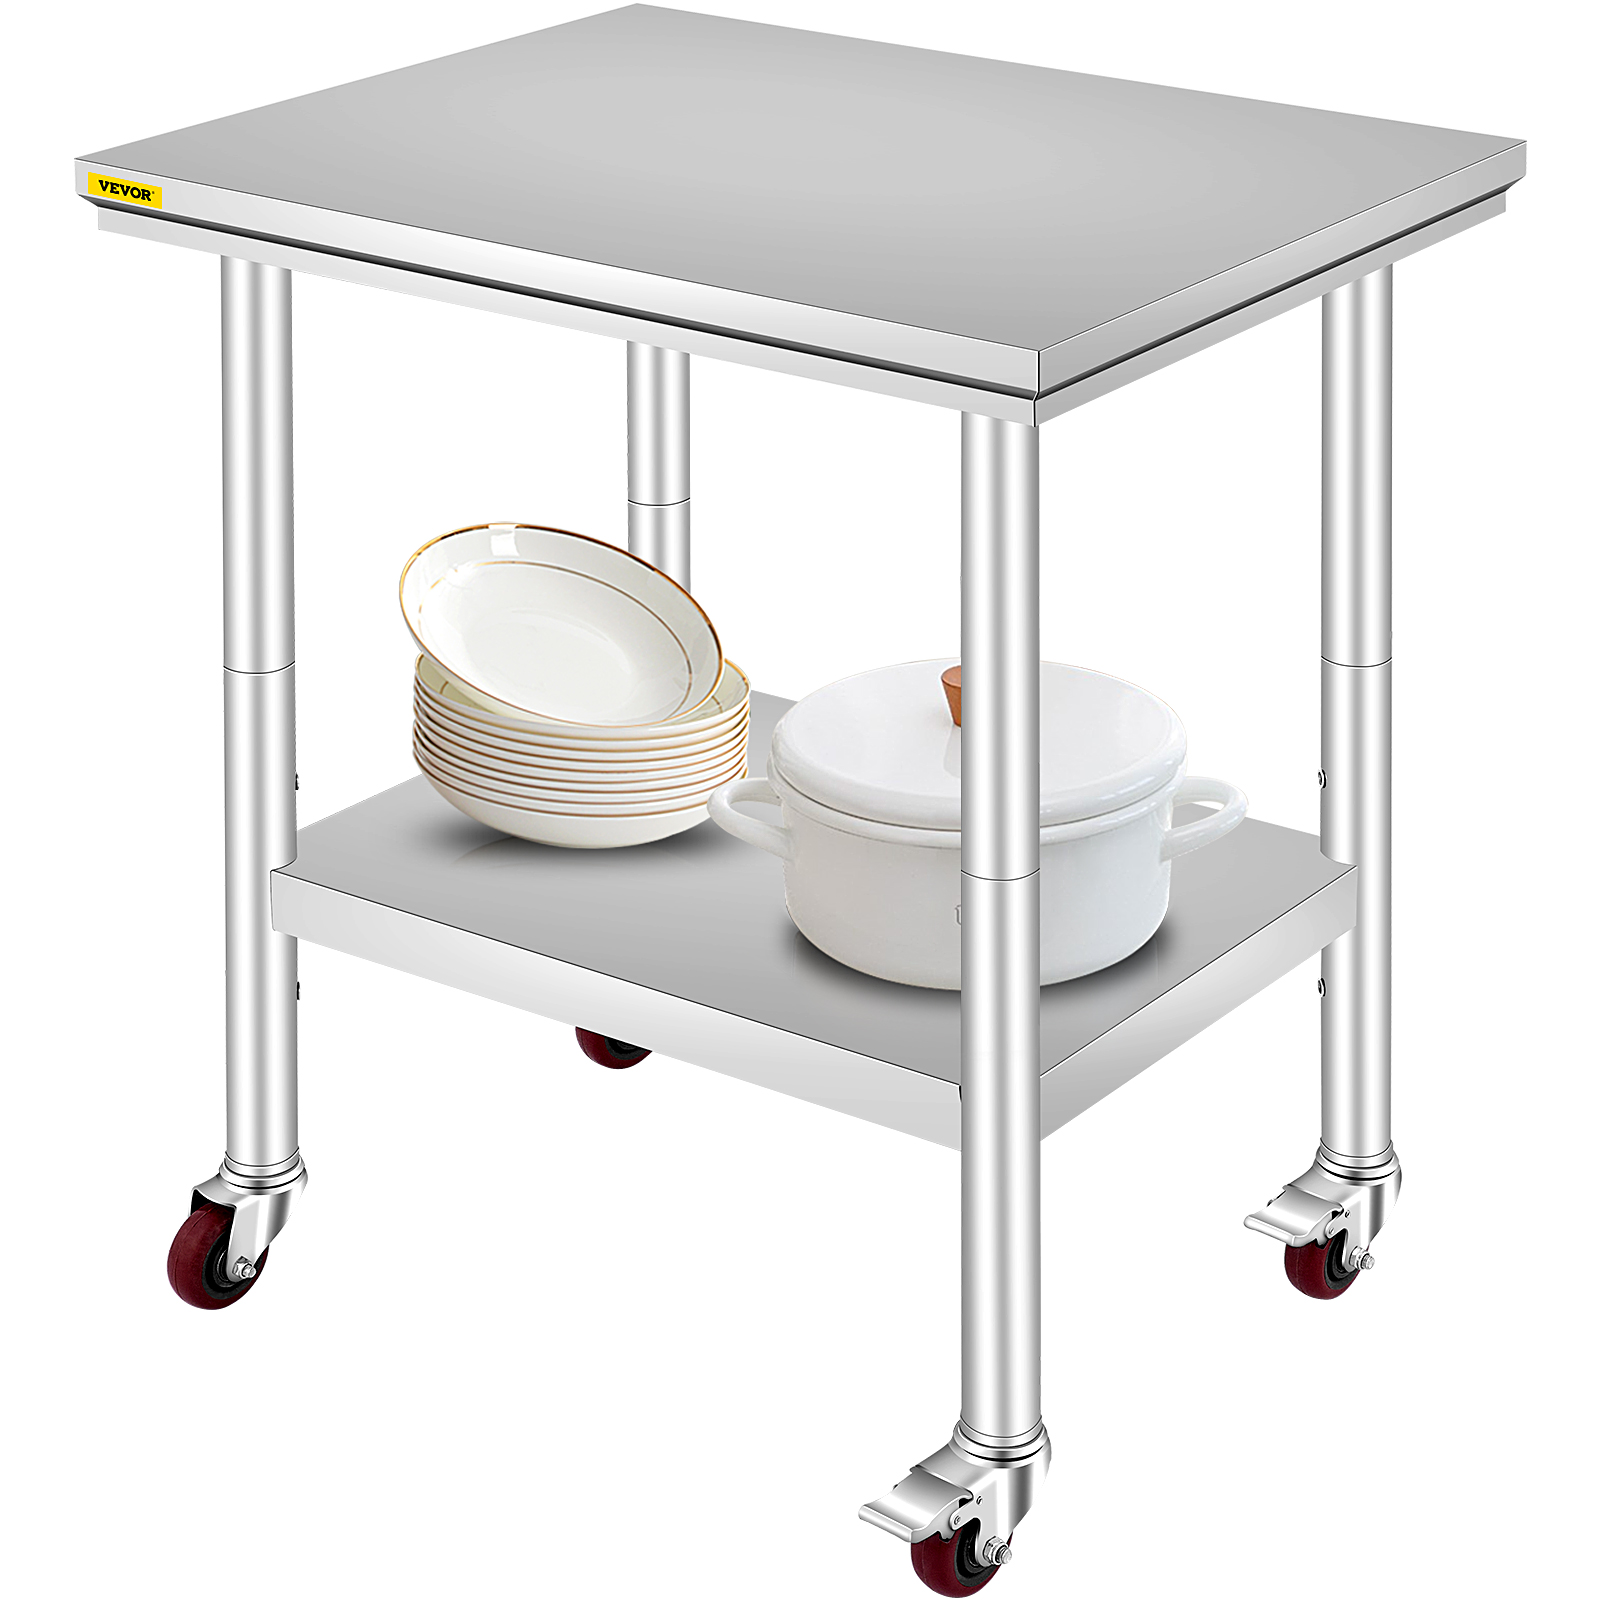 Rolling Stainless Steel Top Kitchen Work Table Cart + Casters Shelving 30"x24 от Vevor Many GEOs